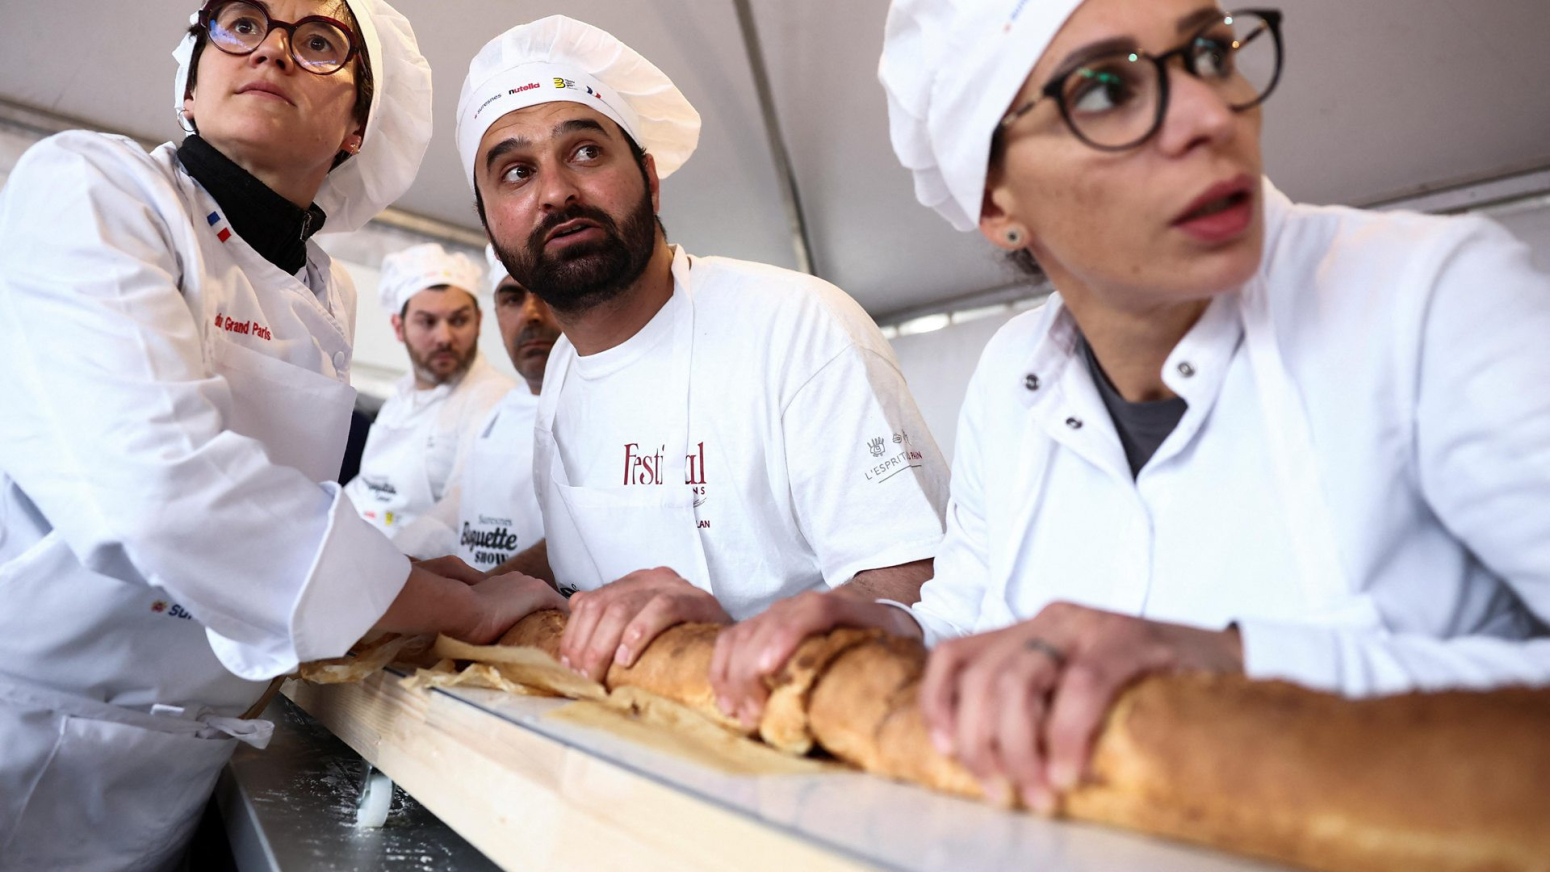 French bakers beat longest baguette world record